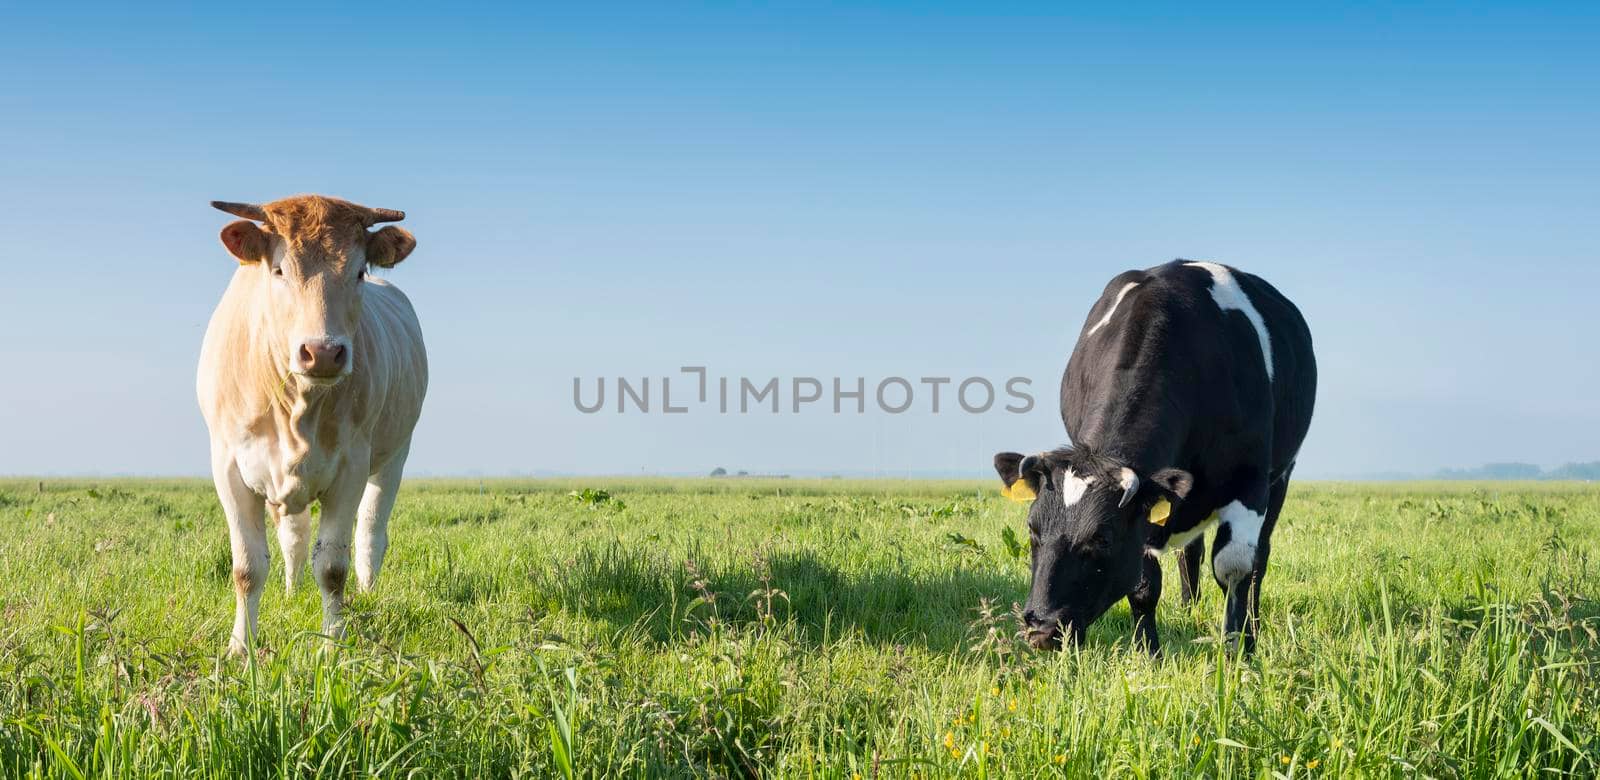 blonde d'aquitaine cow and black one in green grassy meadow under blue sky in holland by ahavelaar